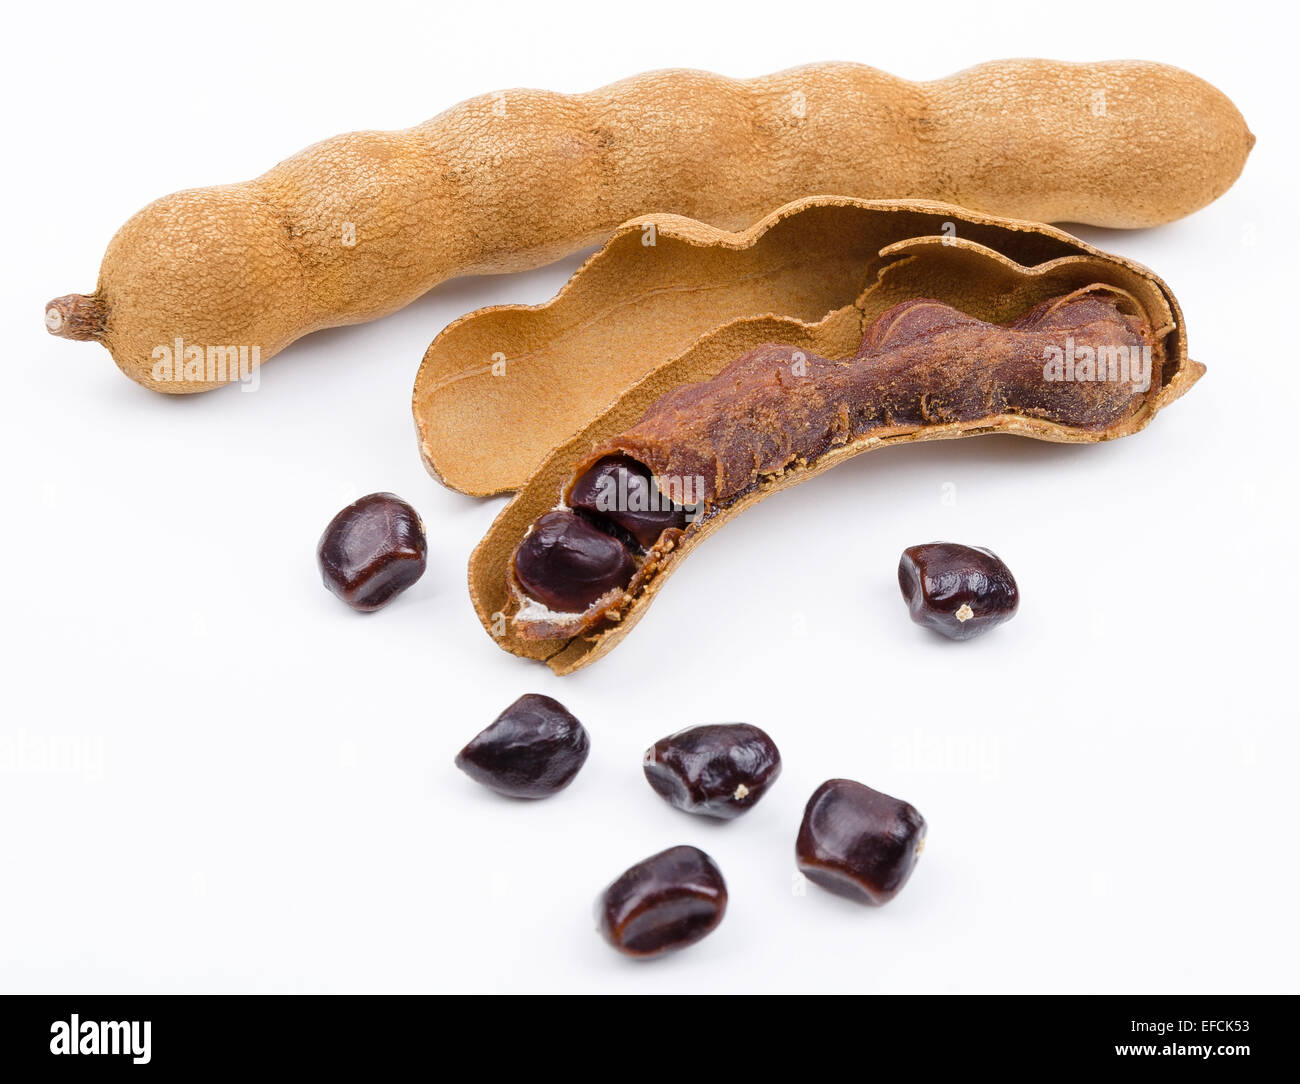 Dried tamarind fruits with seeds on white background. One open pod with pulp inside its shell. Tamarindus indica. Stock Photo